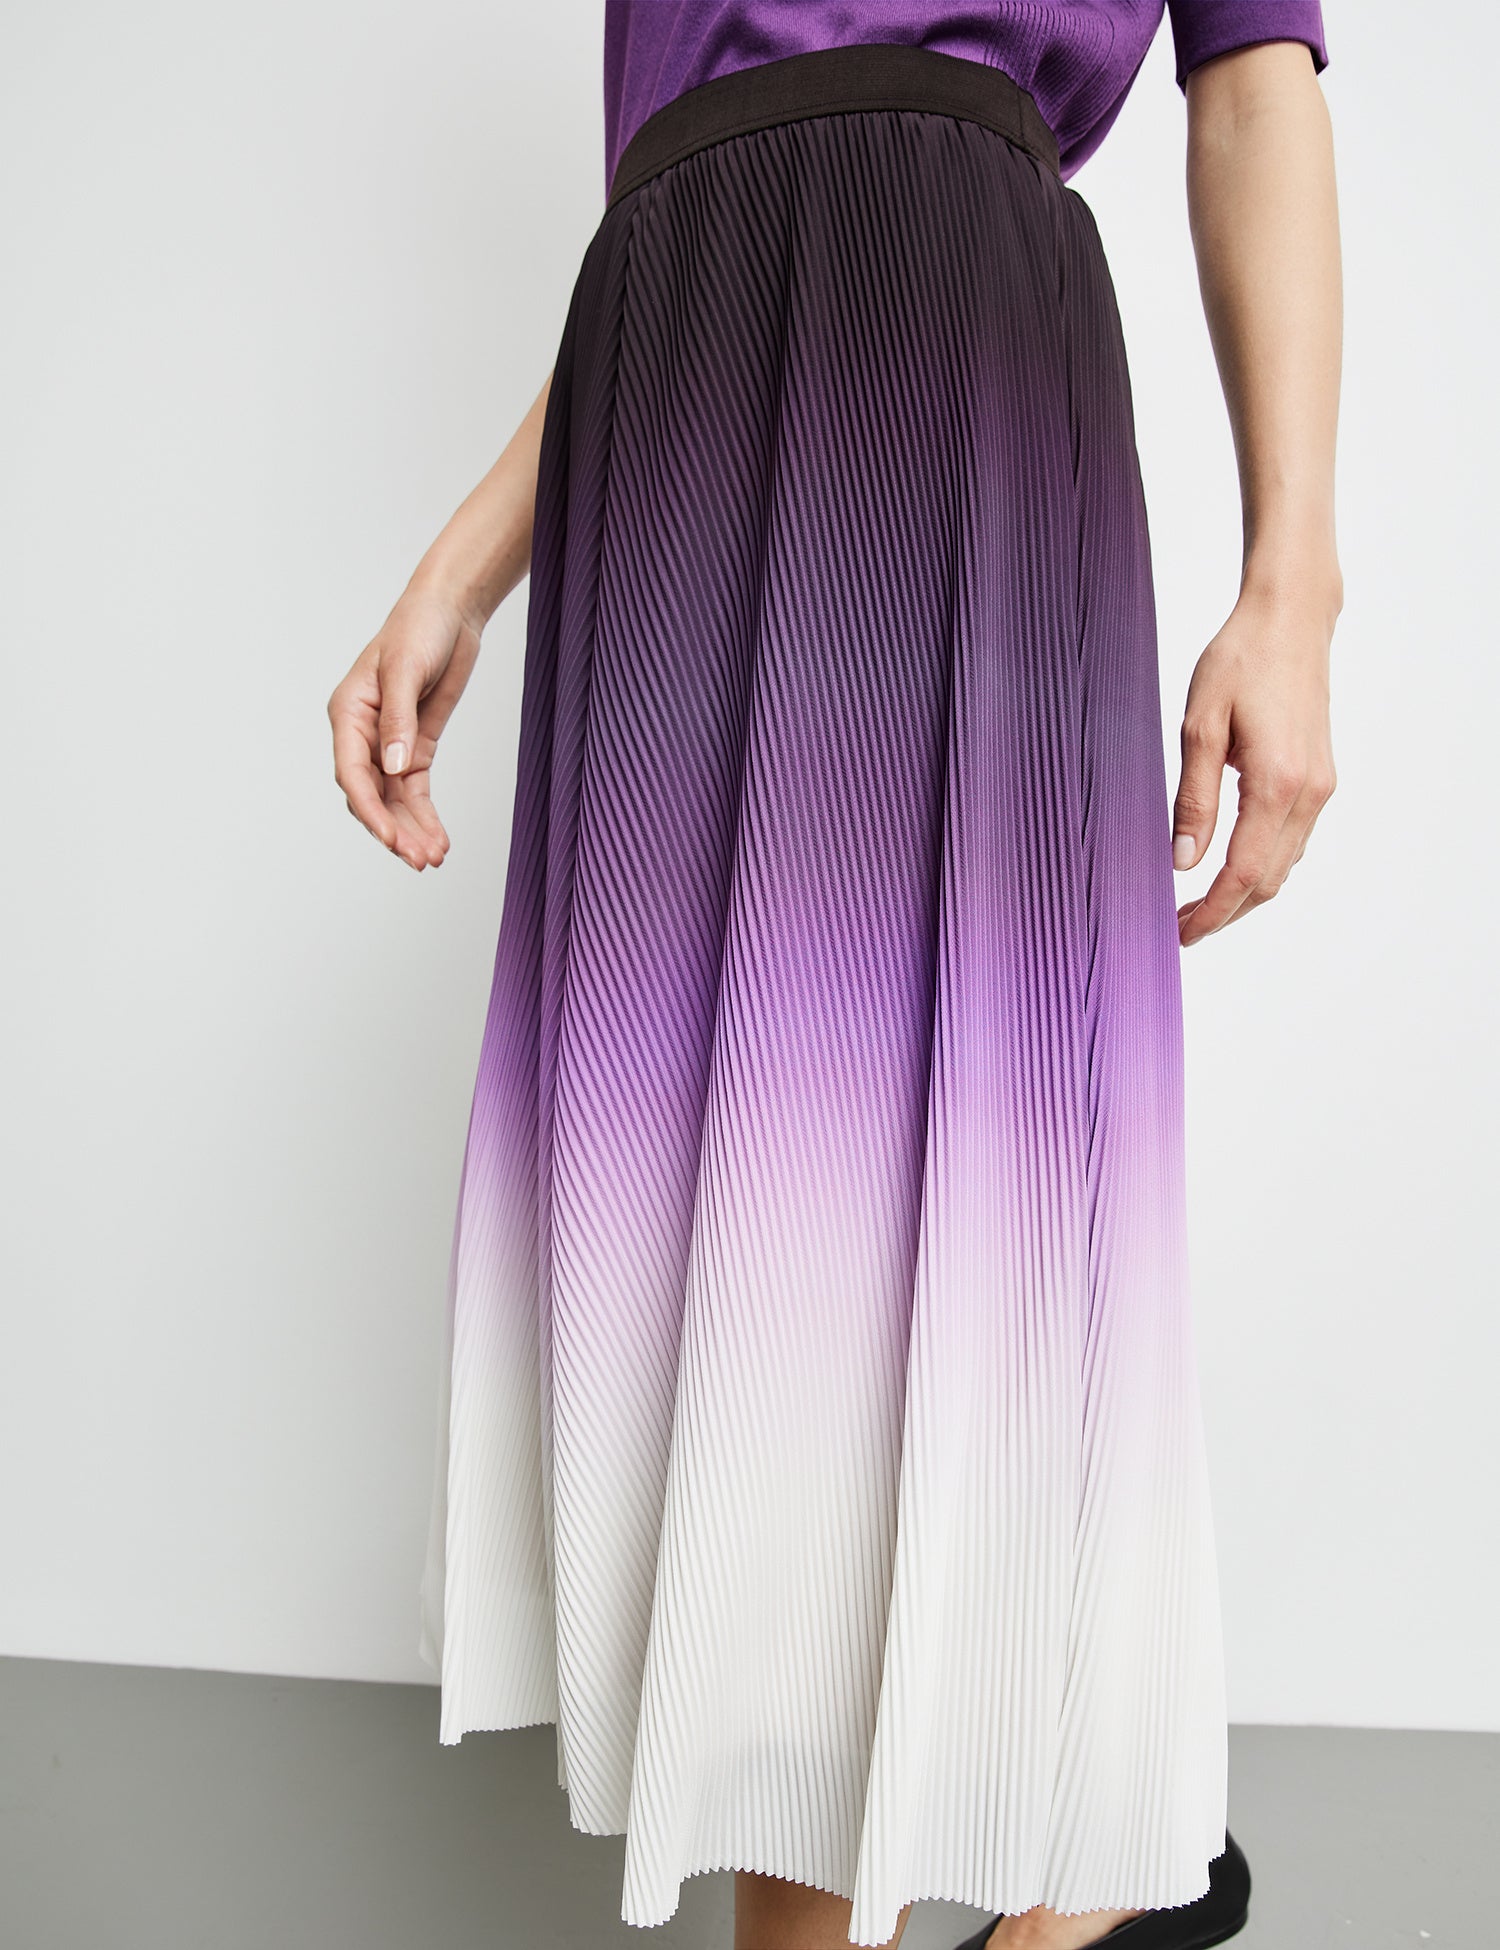 Pleated Skirt With Colour Gradiation And Elasticated Waistband_04